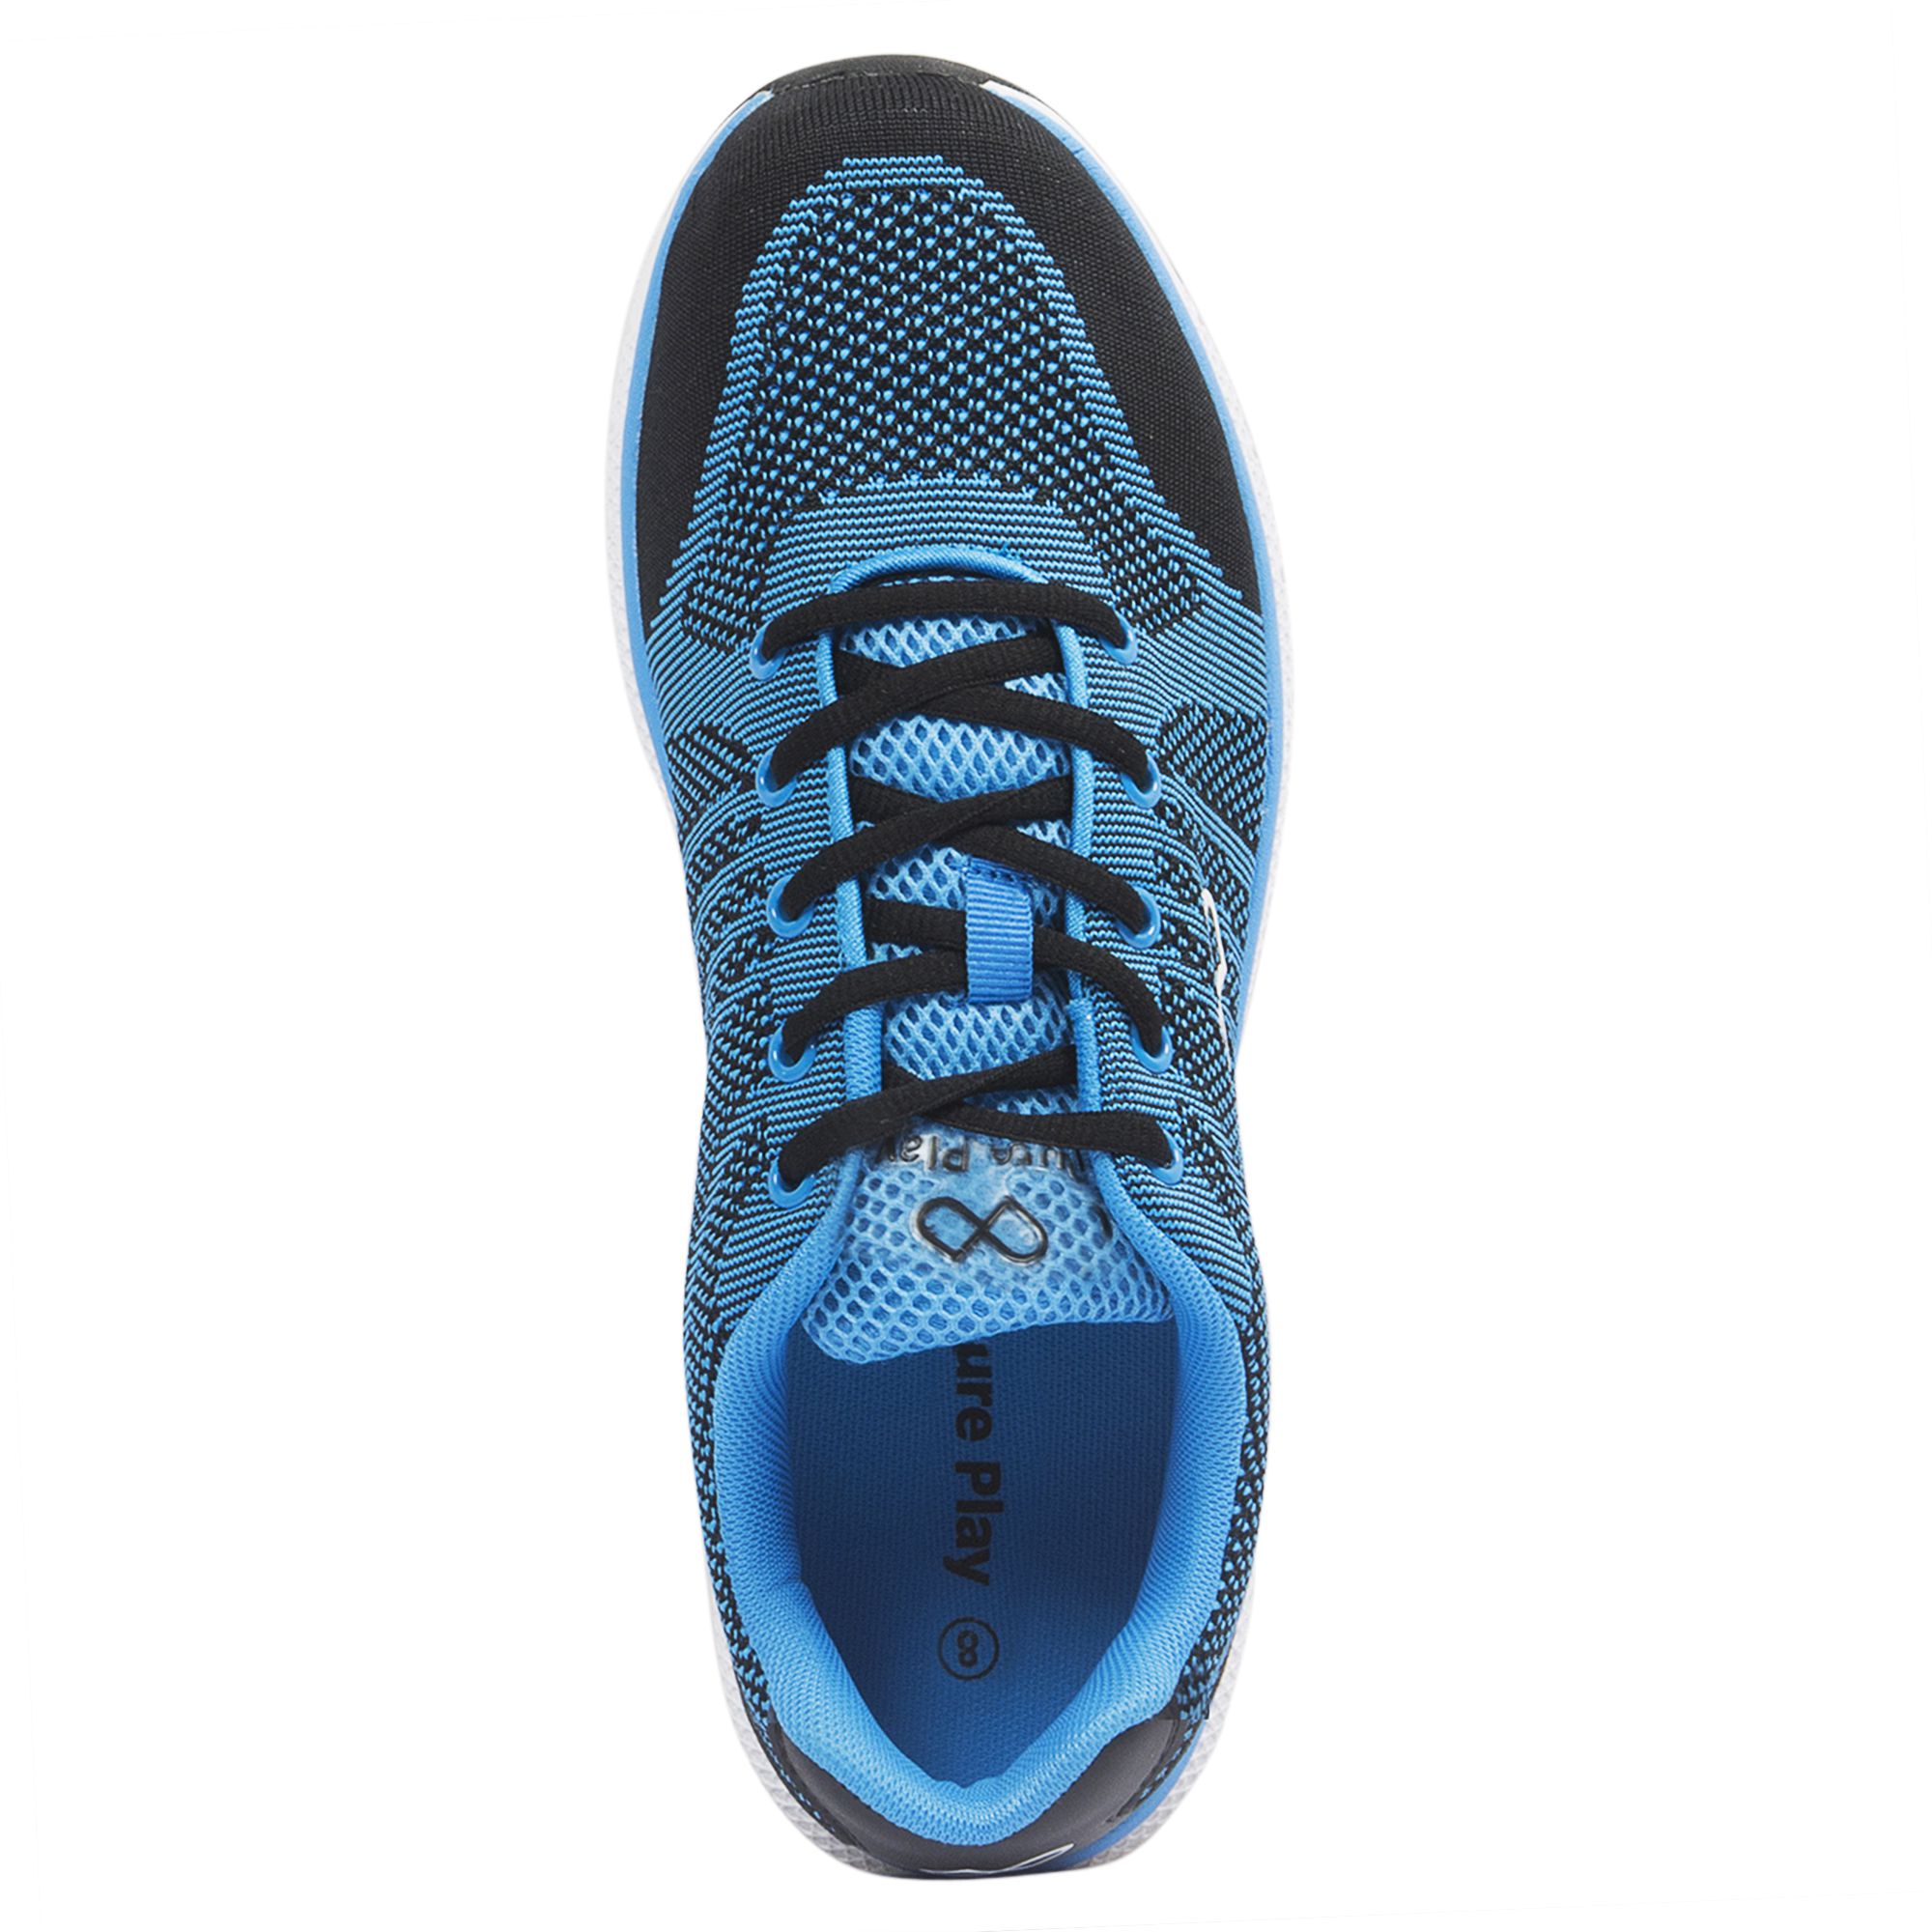 Pure Play Turquoise Running Shoes - Buy Pure Play Turquoise Running ...